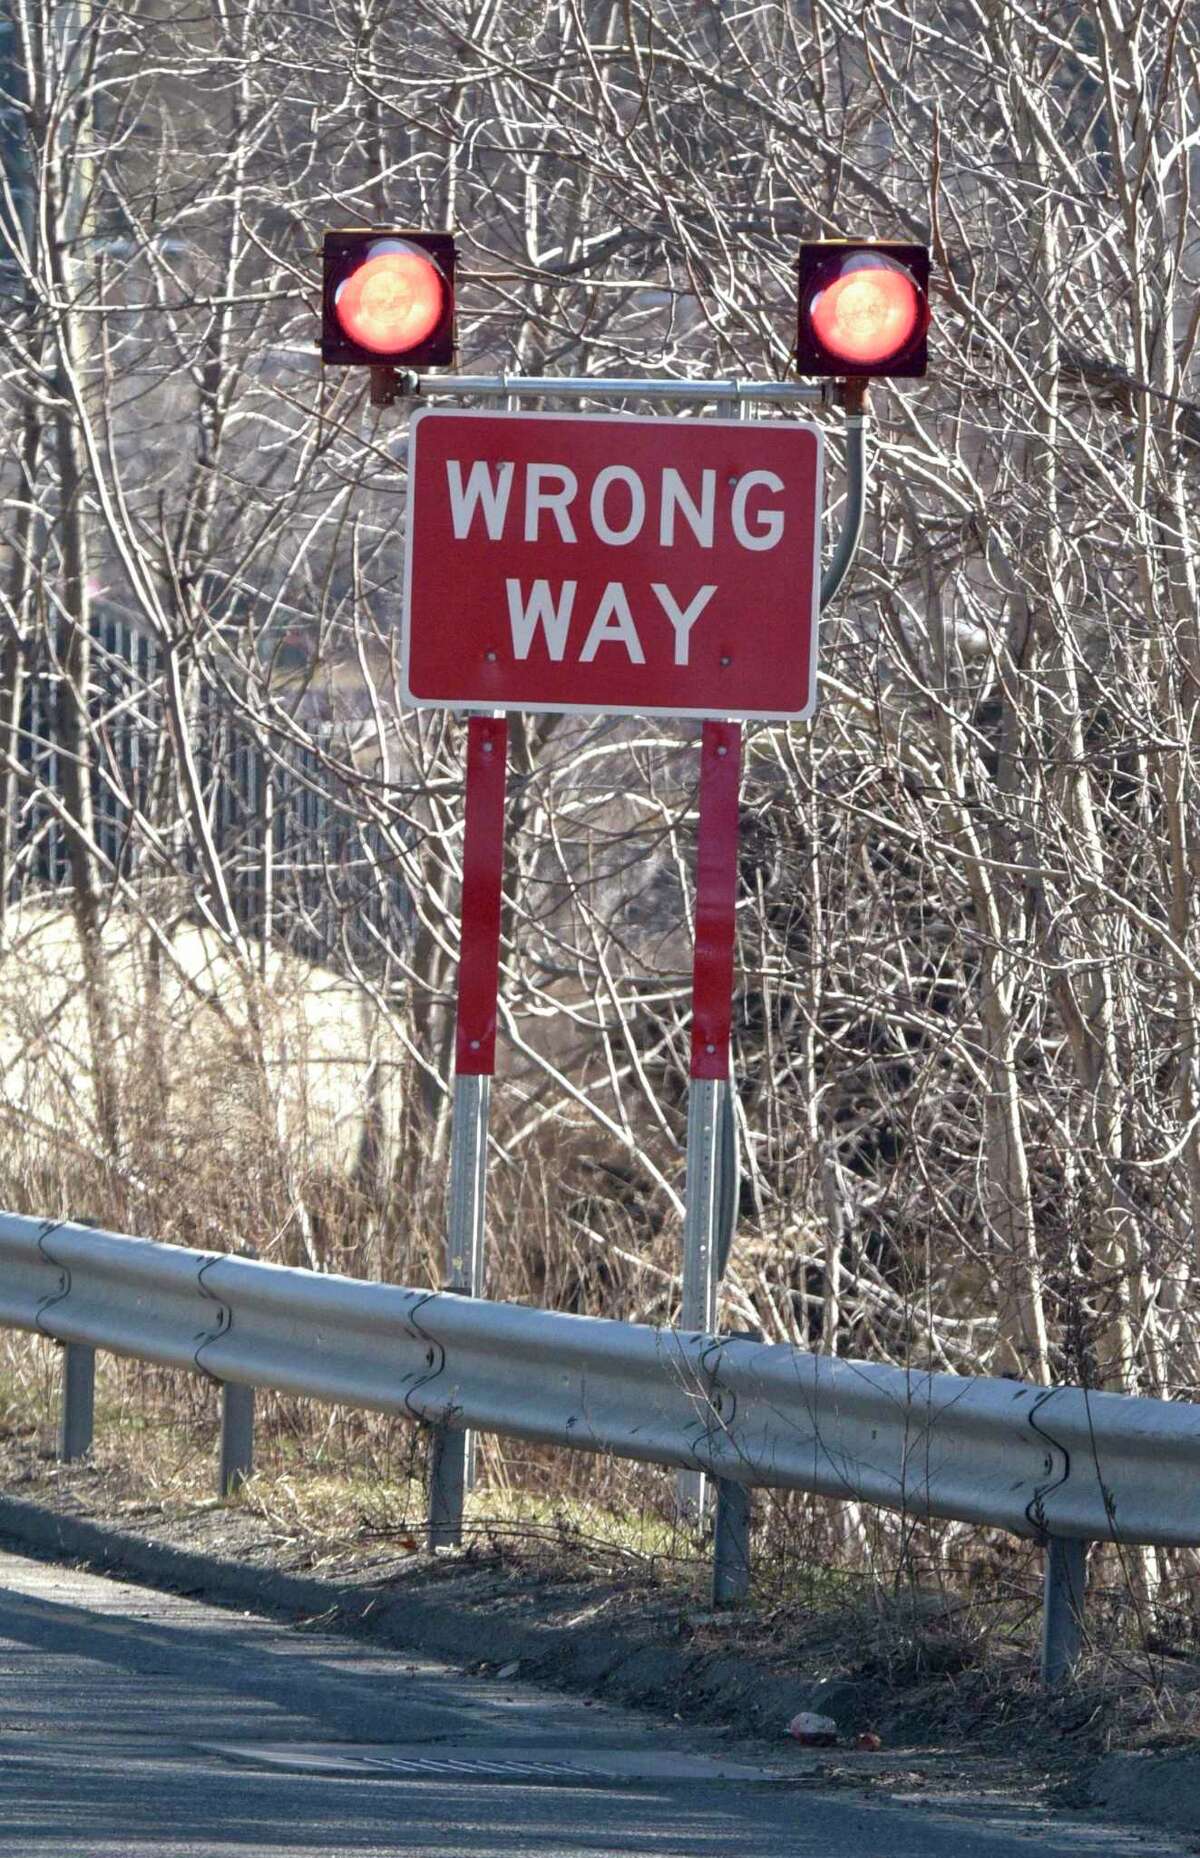 Warning lights were installed in 2020 along the Interstate 84 westbound Exit 8 off-ramp in Danbury as part of an effort to combat wrong-way driving. The roughly $250,000 project was part of an initiative by the state Department of Transportation to upgrade and standardize traffic signs and pavement markings. The state is set to dedicate tens of millions more to expand the lights to other highway ramps.